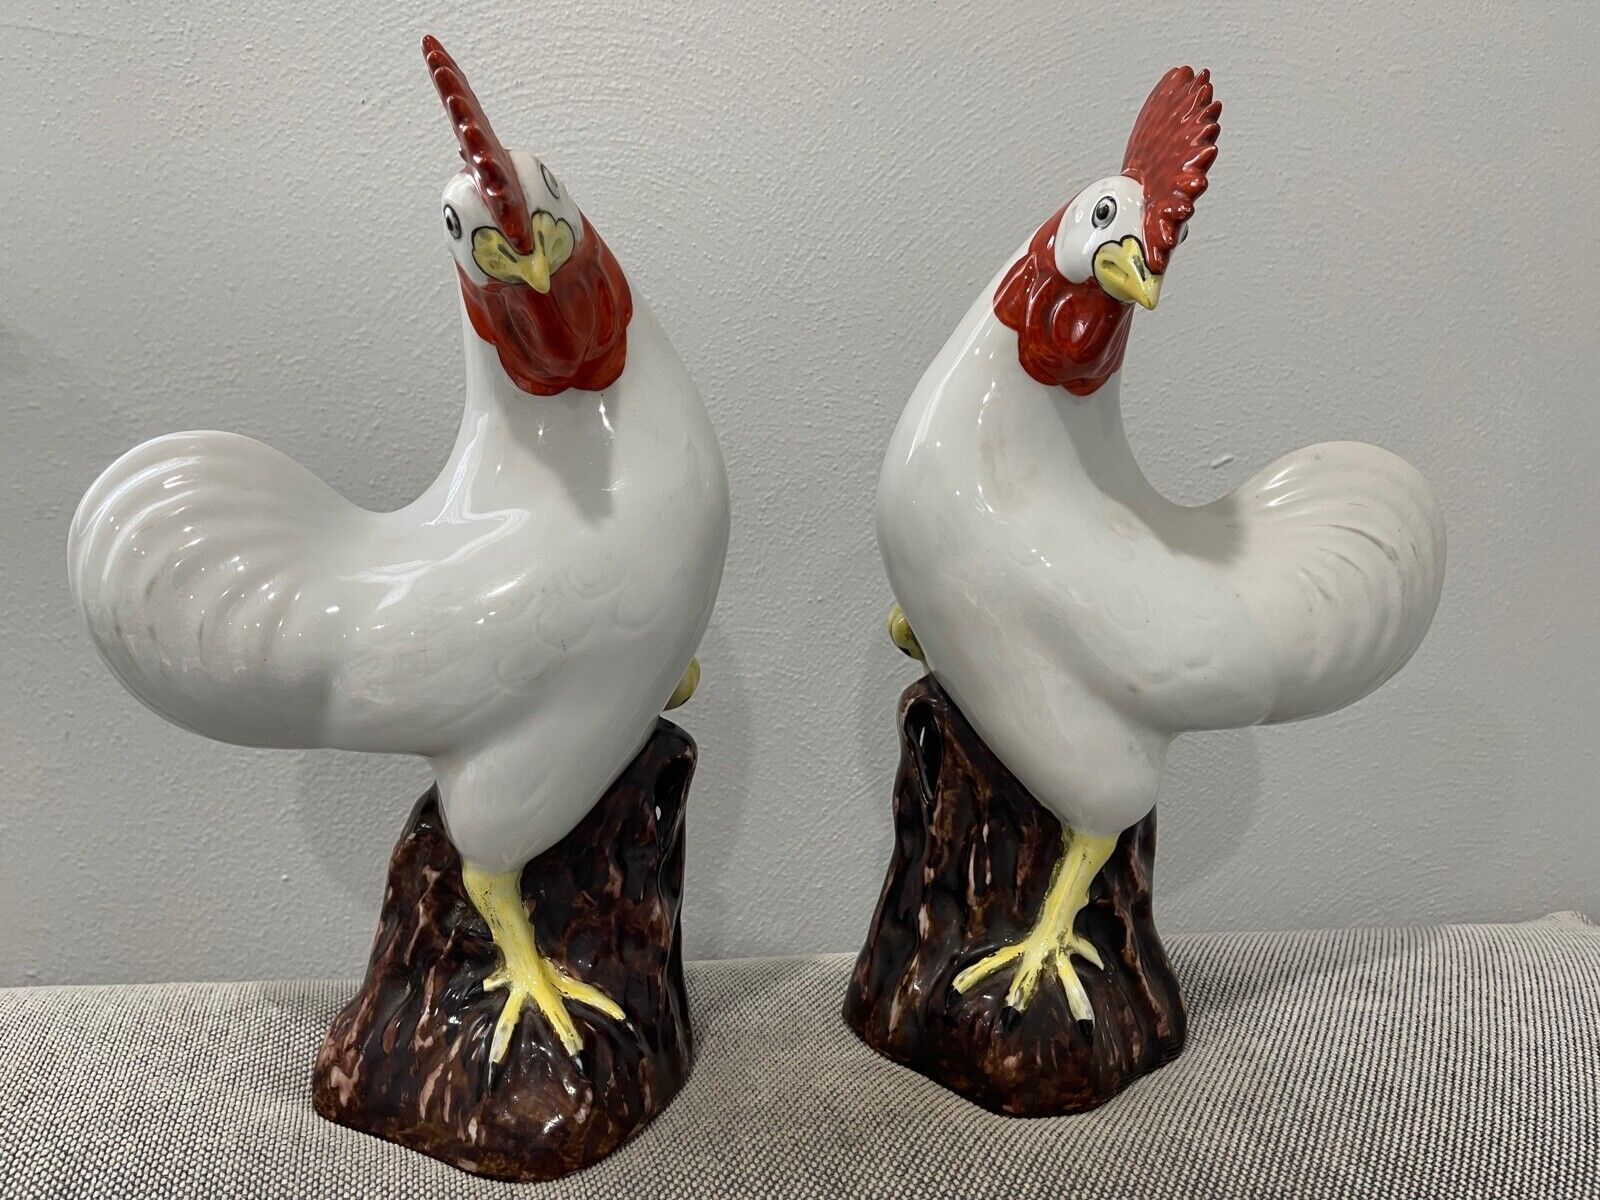 Vintage Antique Chinese Export Porcelain Pair of Chickens Statues / Figurines